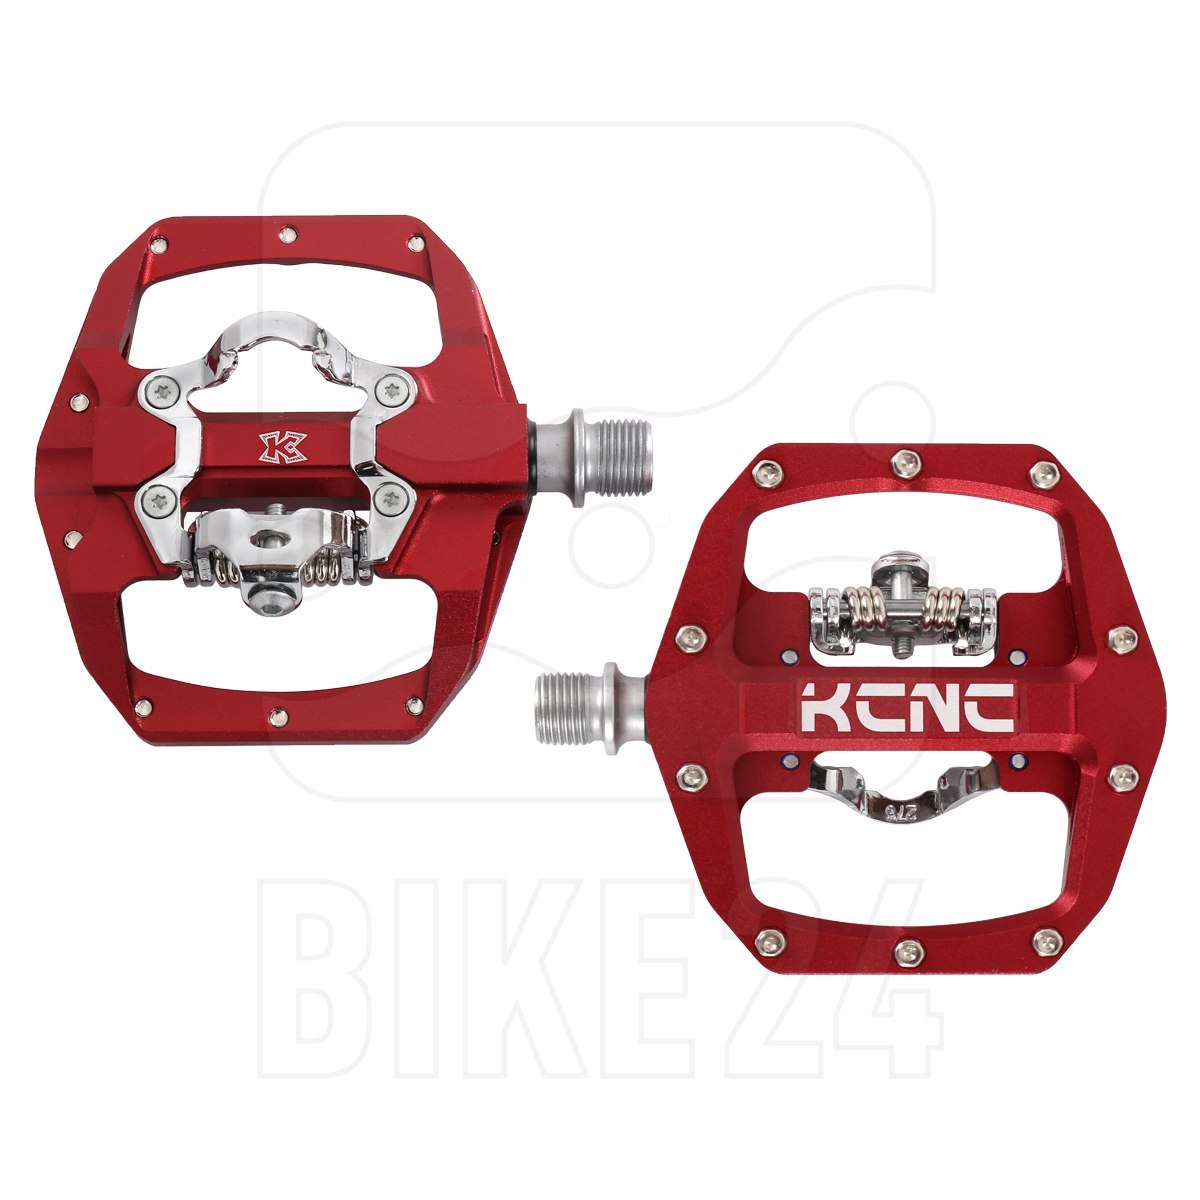 Productfoto van KCNC FR TRAP Clipless Pedal with Steel Axle - red